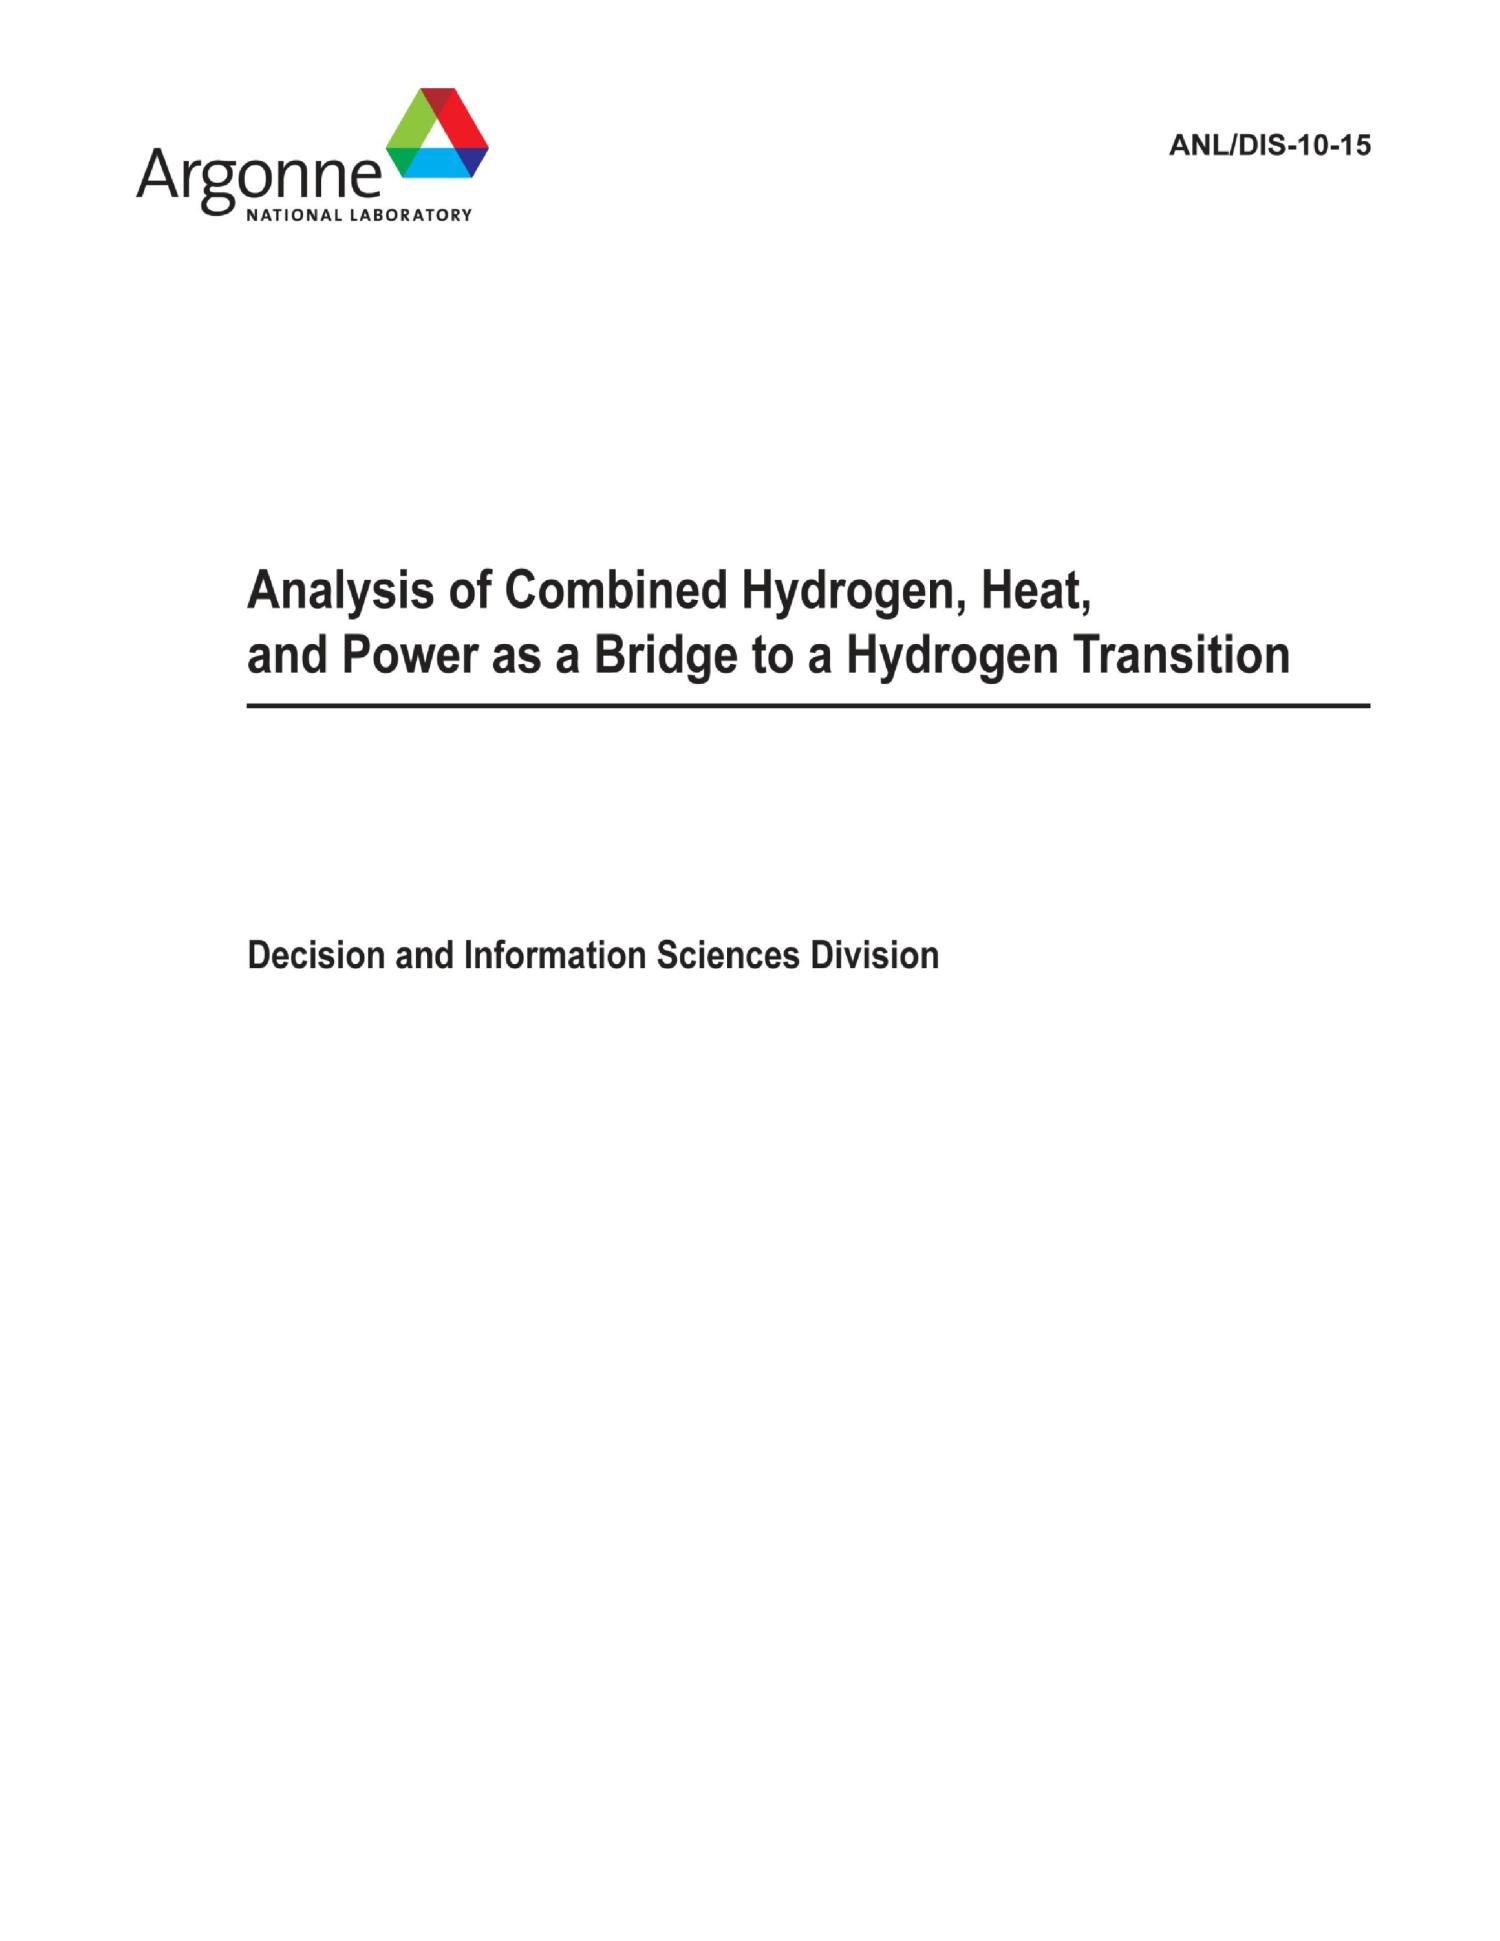 Analysis of Combined Hydrogen, Heat, and Power as a Bridge to a Hydrogen Transition.
                                                
                                                    [Sequence #]: 1 of 72
                                                